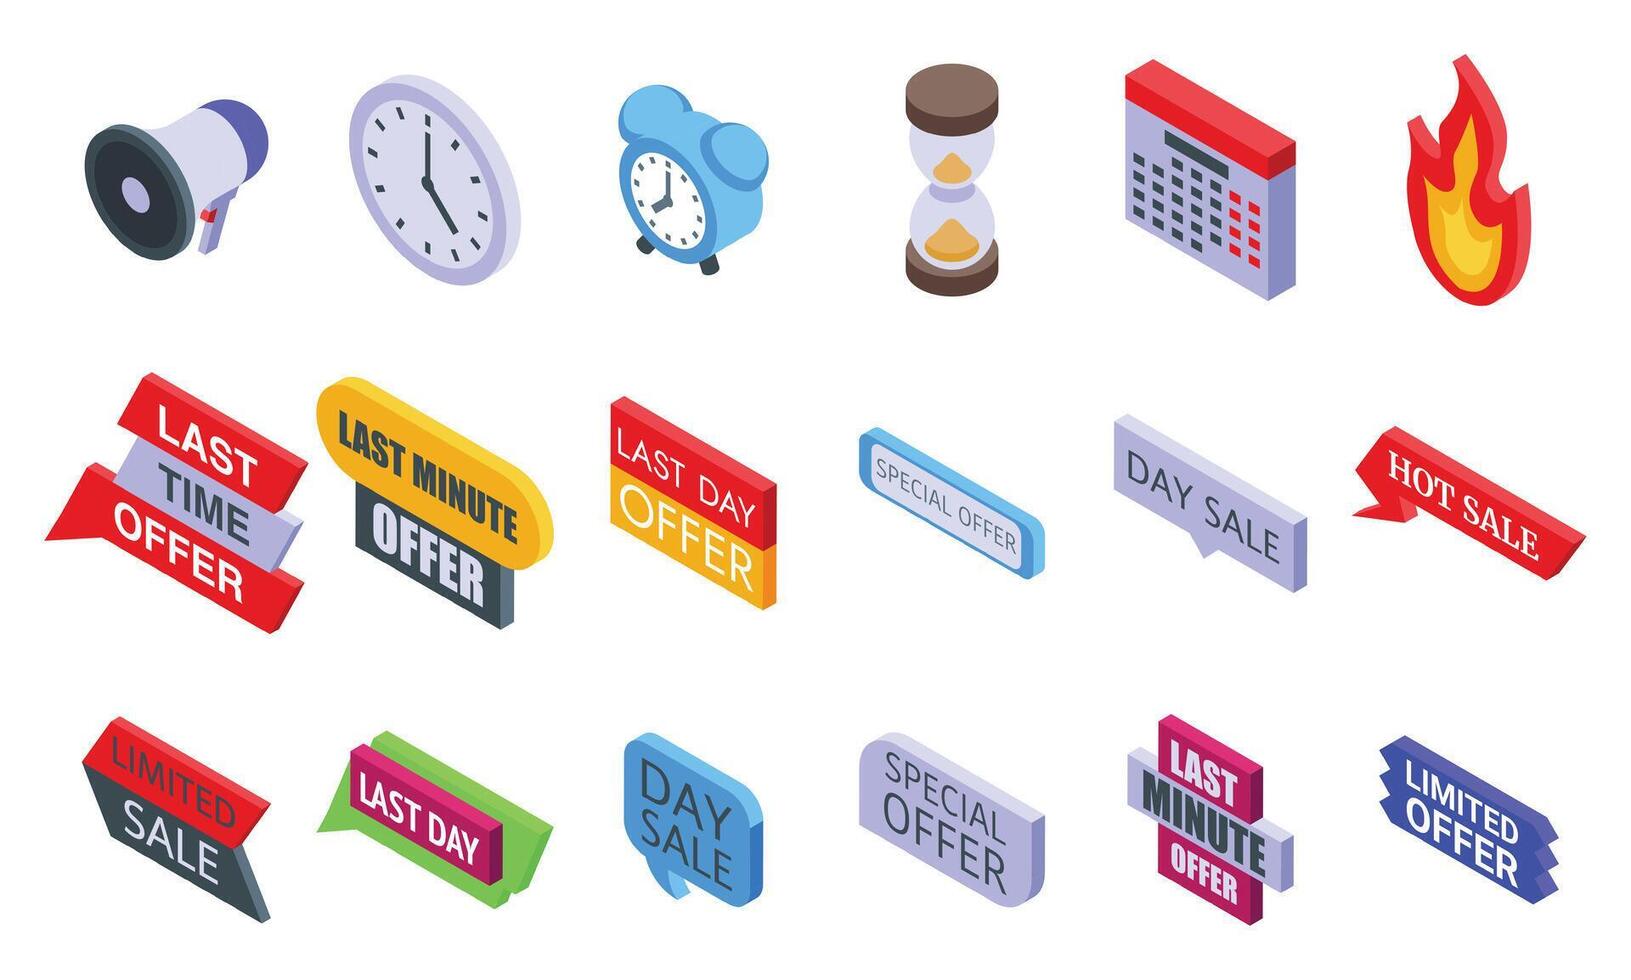 Last time offer icons set isometric vector. Sale flash hour vector